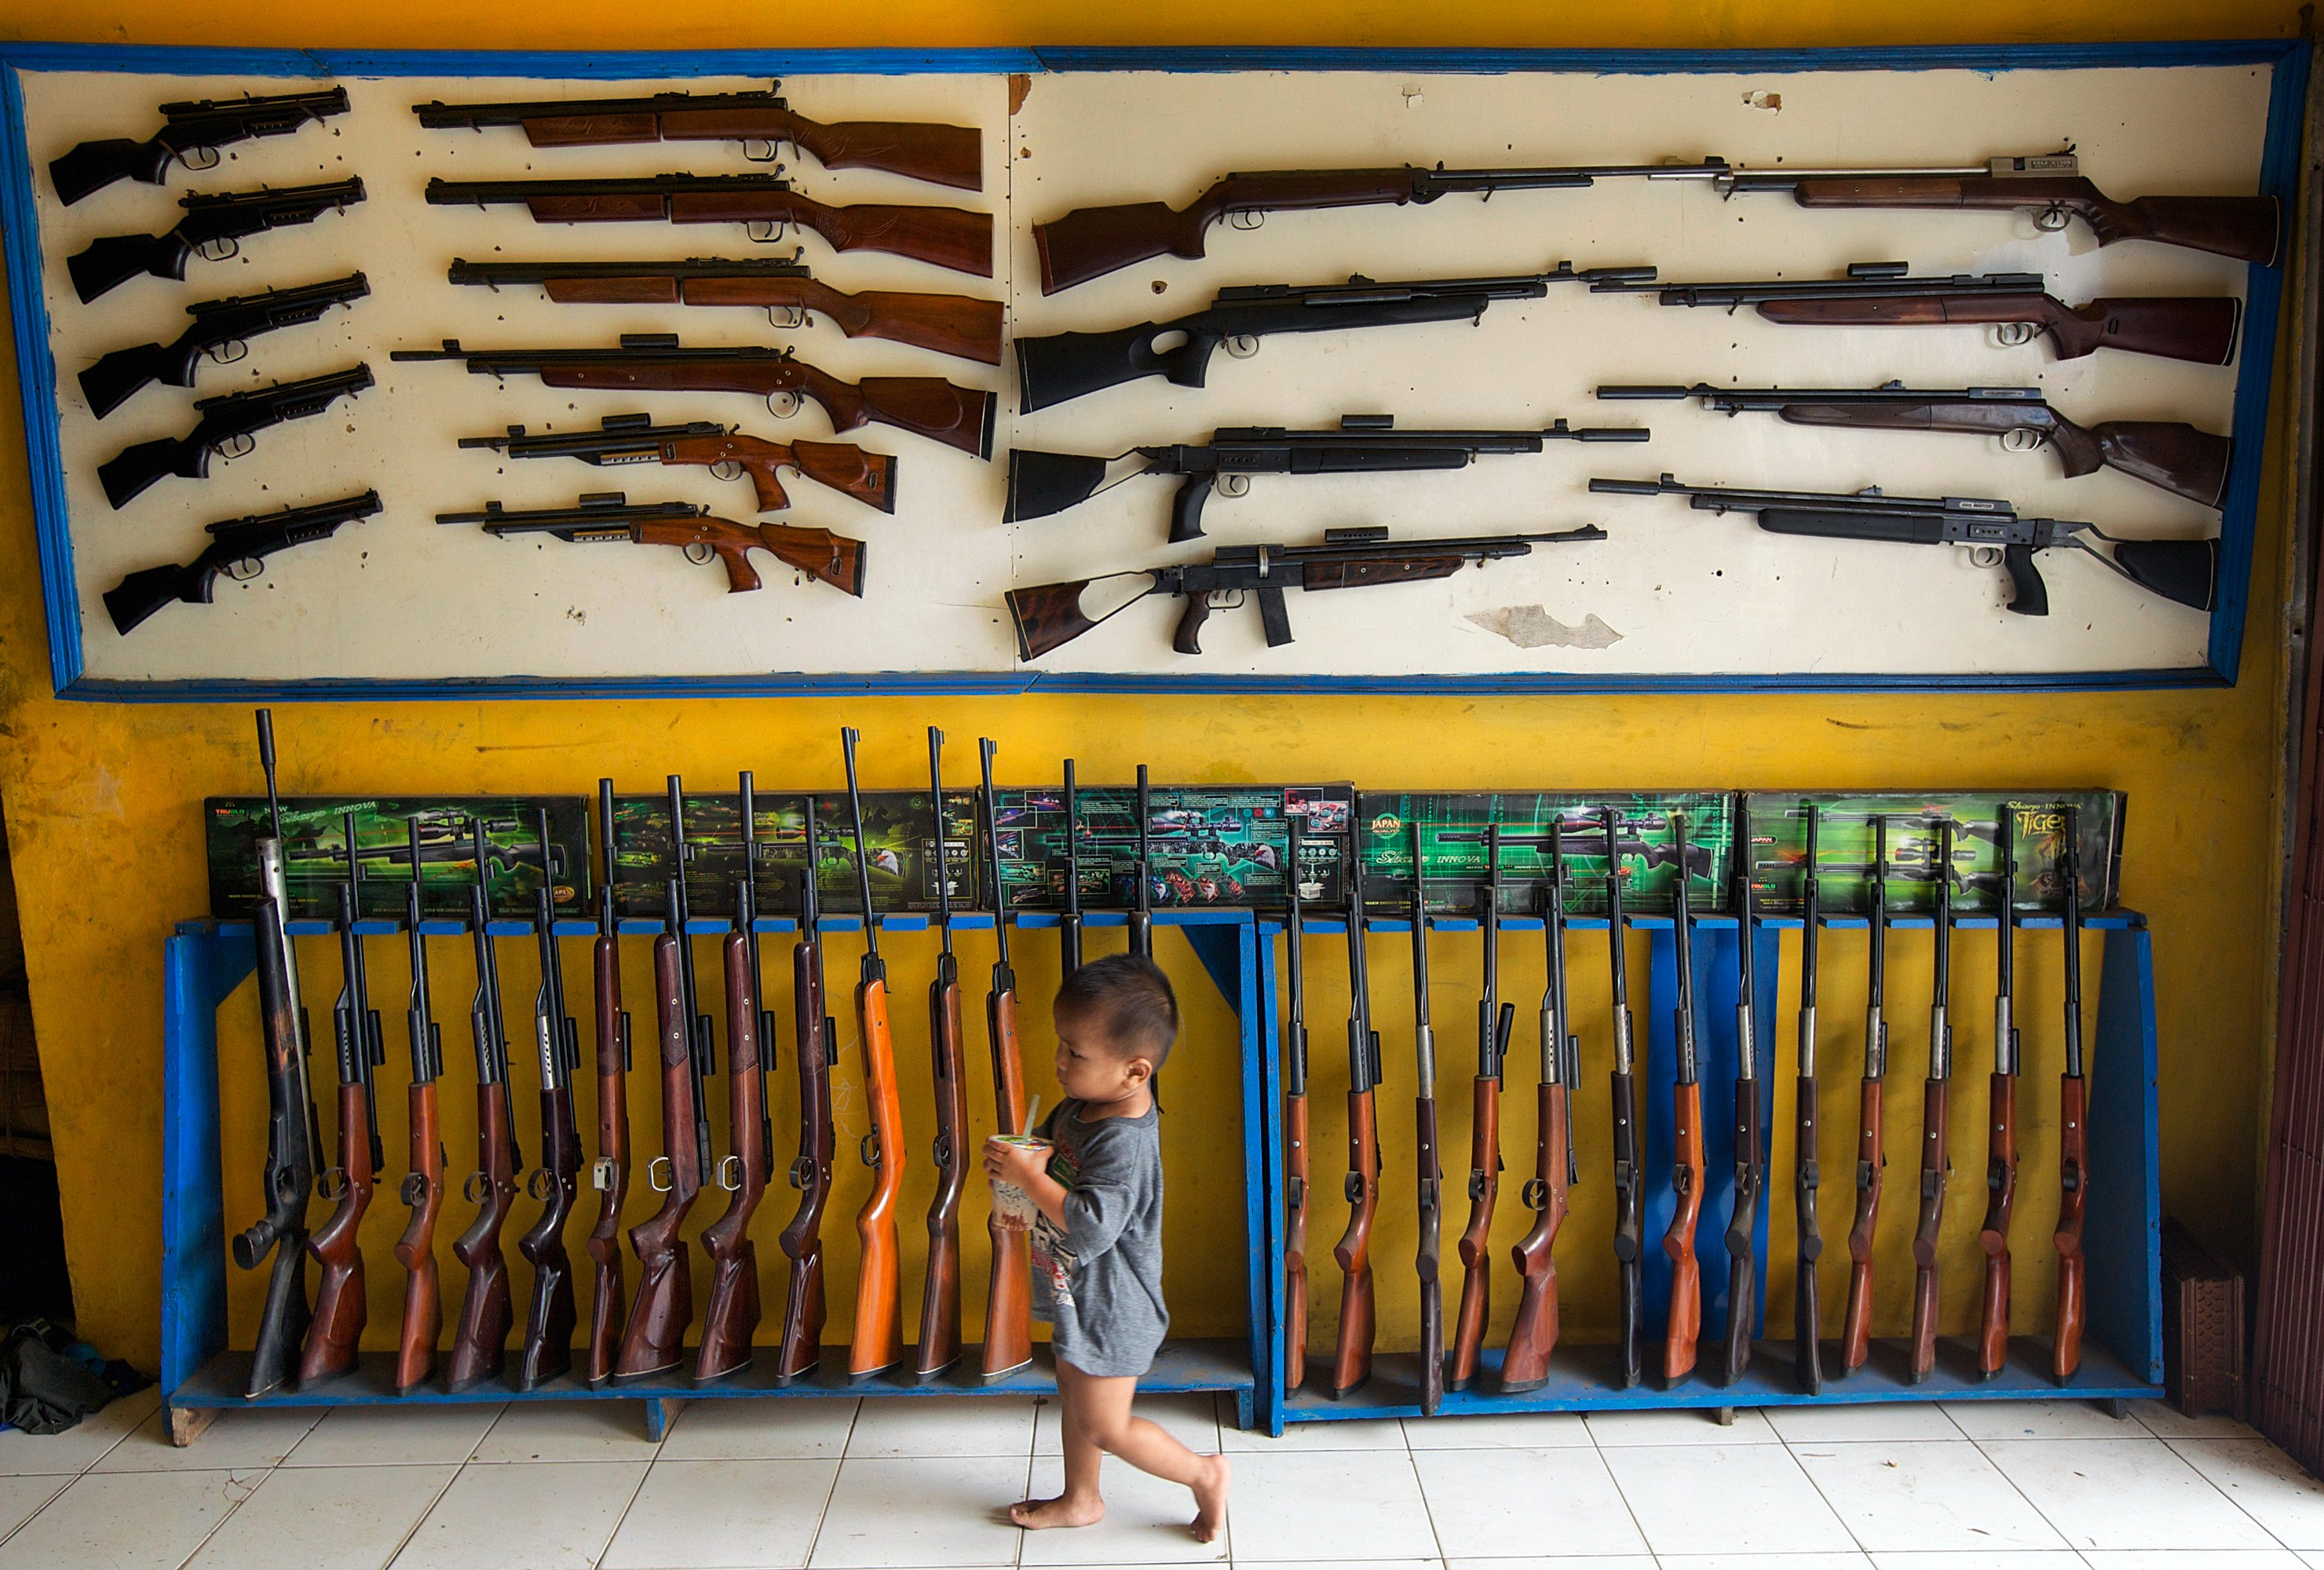 CIPACING, INDONESIA - MARCH 4: The son of the owner of an air rifle shop walks past air rifles on display at the shop nearby dozens of small air rifle workshops on March 4, 2014 in Cipacing, 